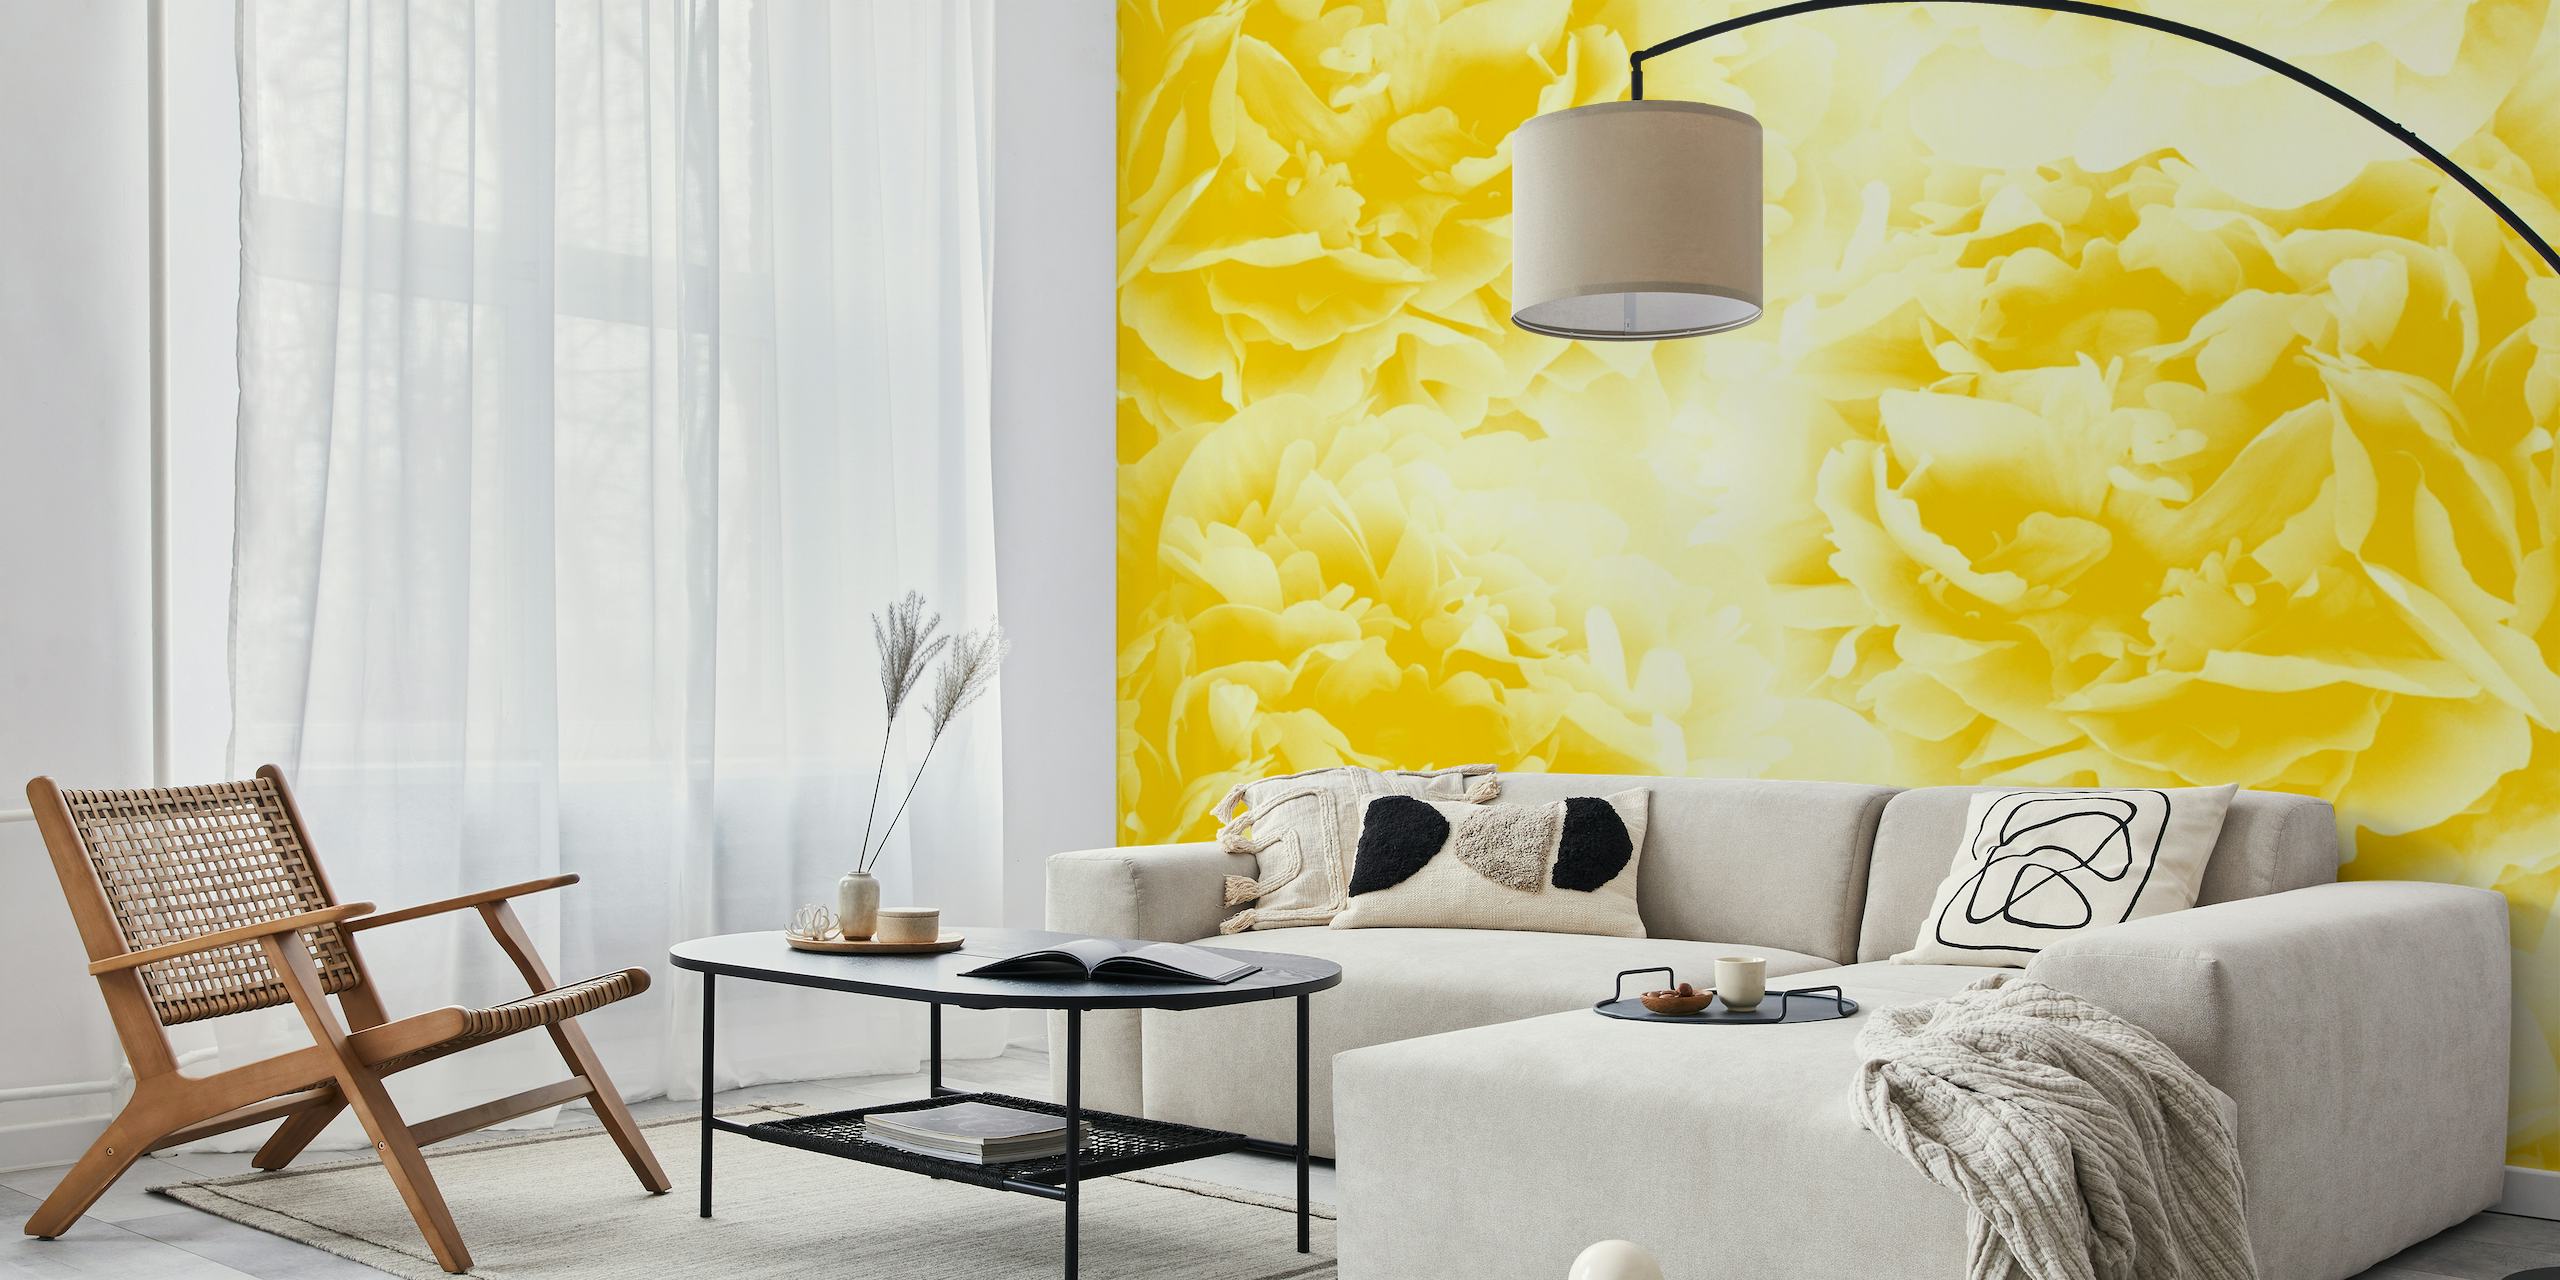 Bright yellow peonies wallpaper design for home decor.